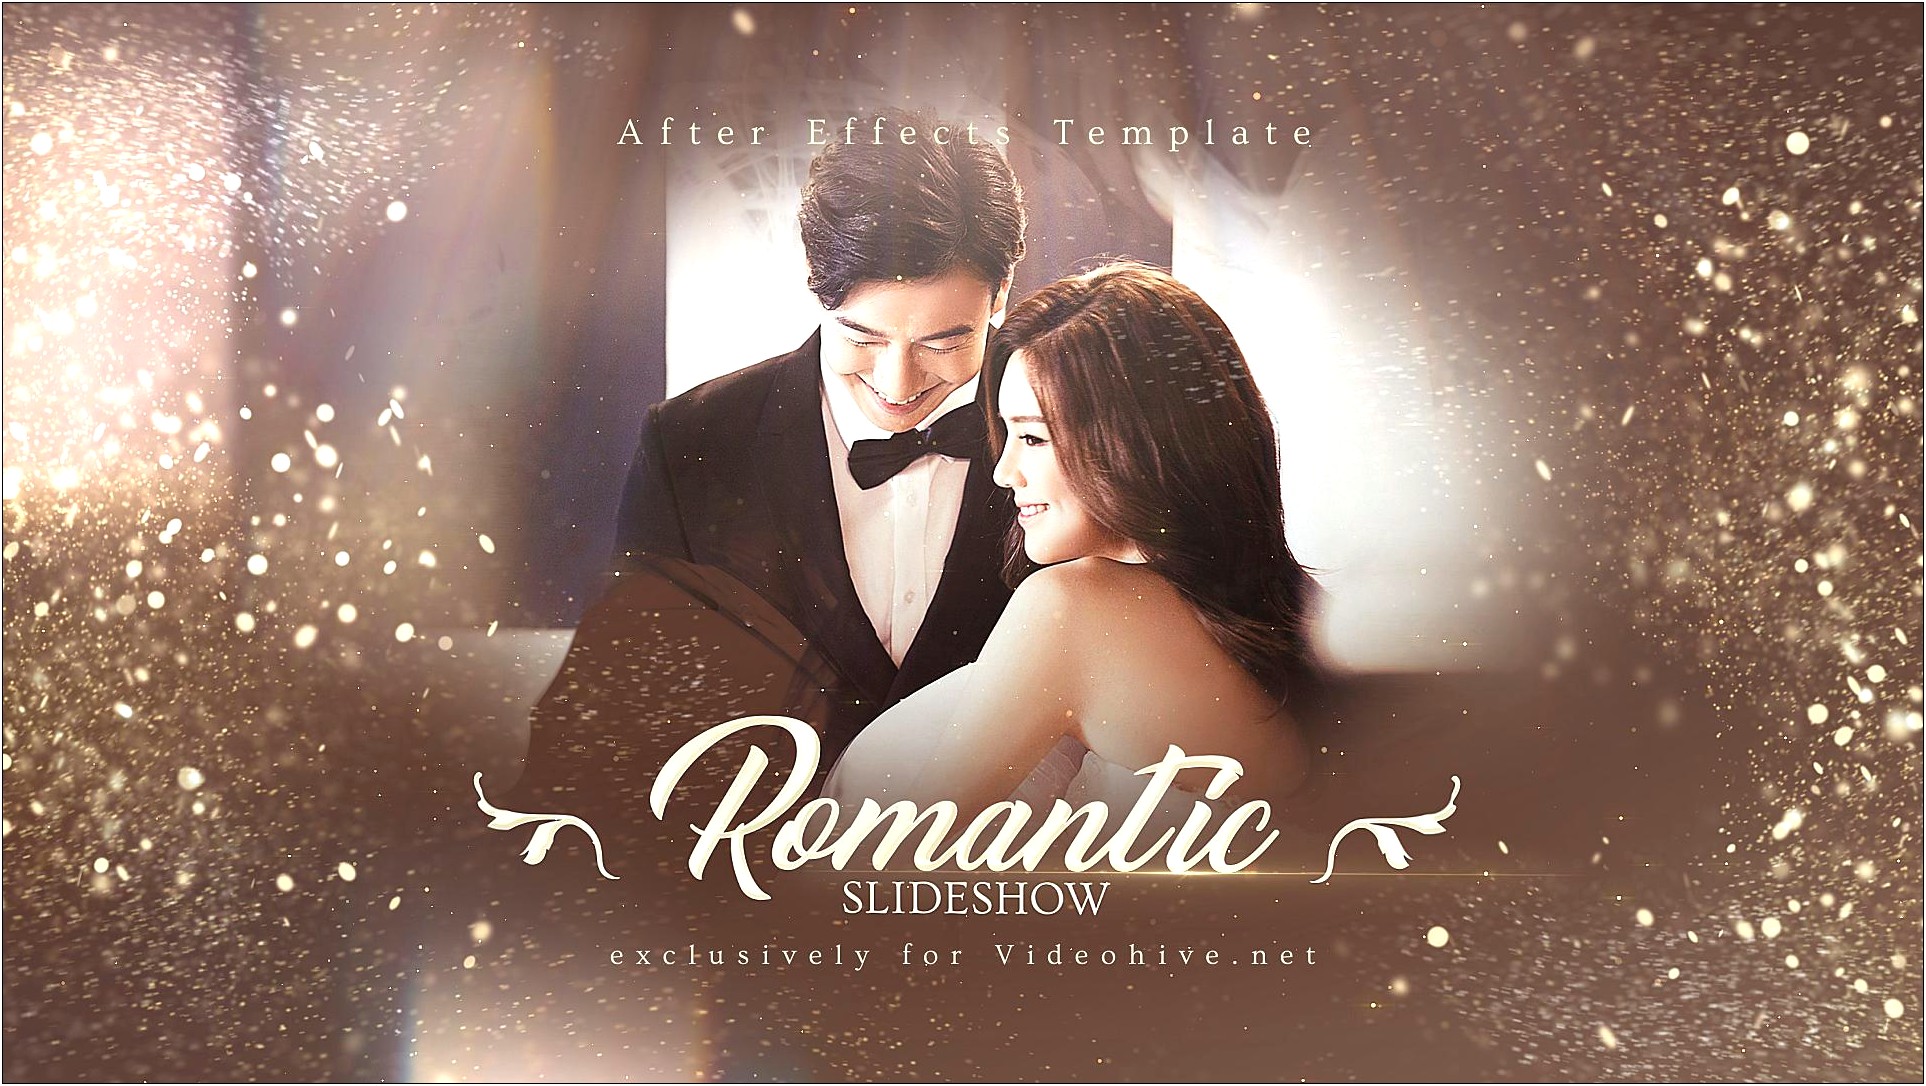 After Effects Template Free Love Story Romantic Slideshow